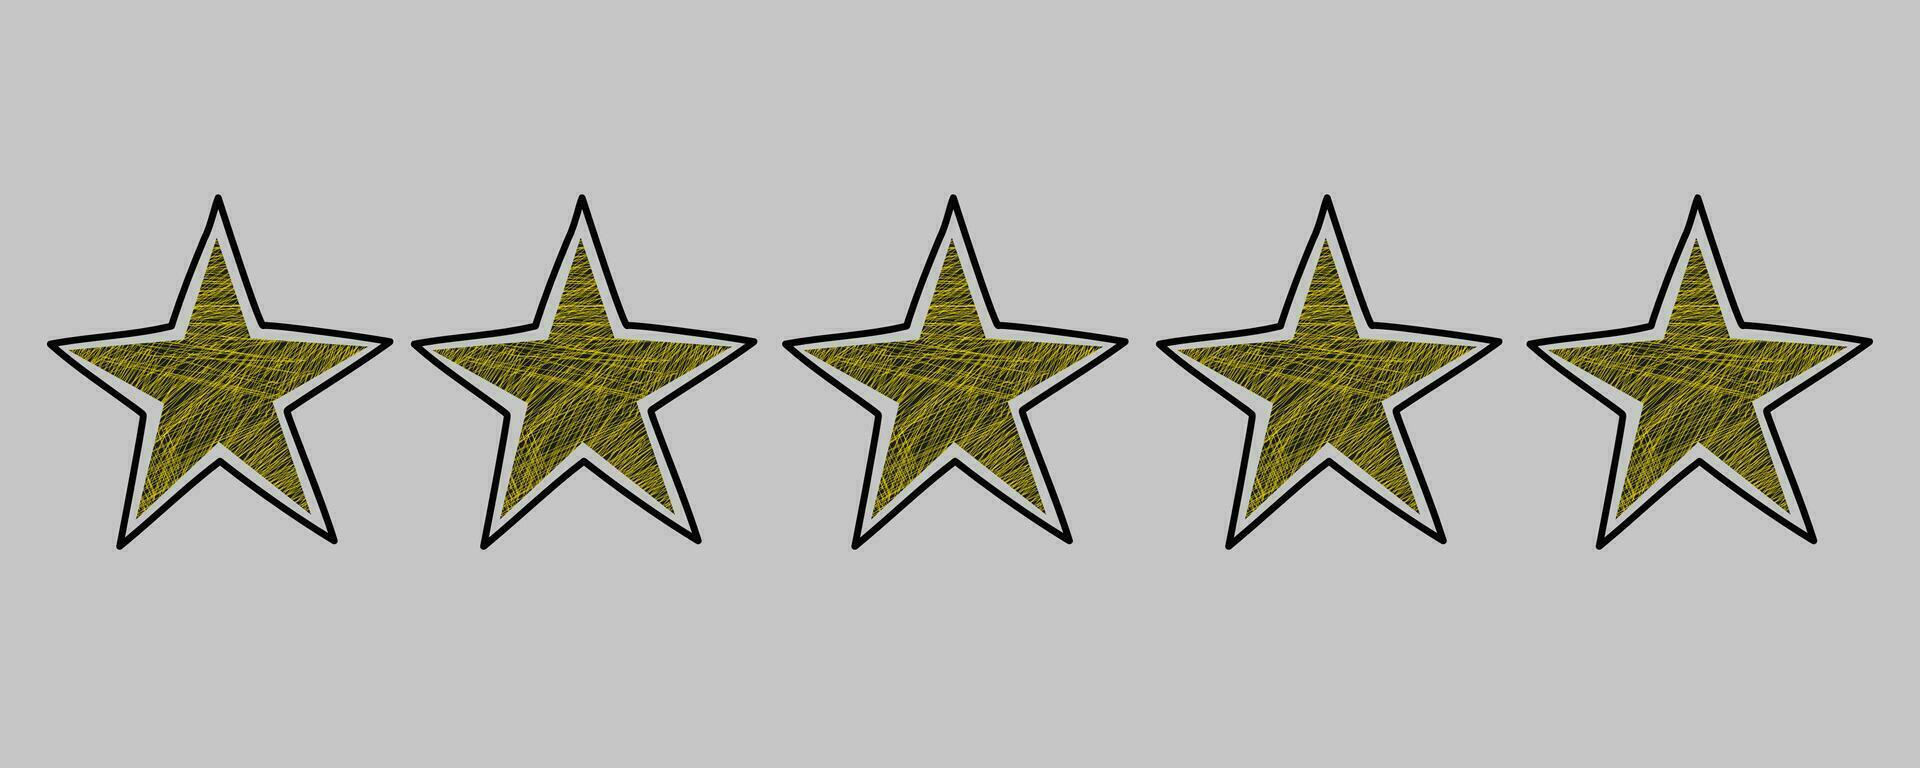 Five star feedback doodle. Sketch grunge style. Isolated vector illustration